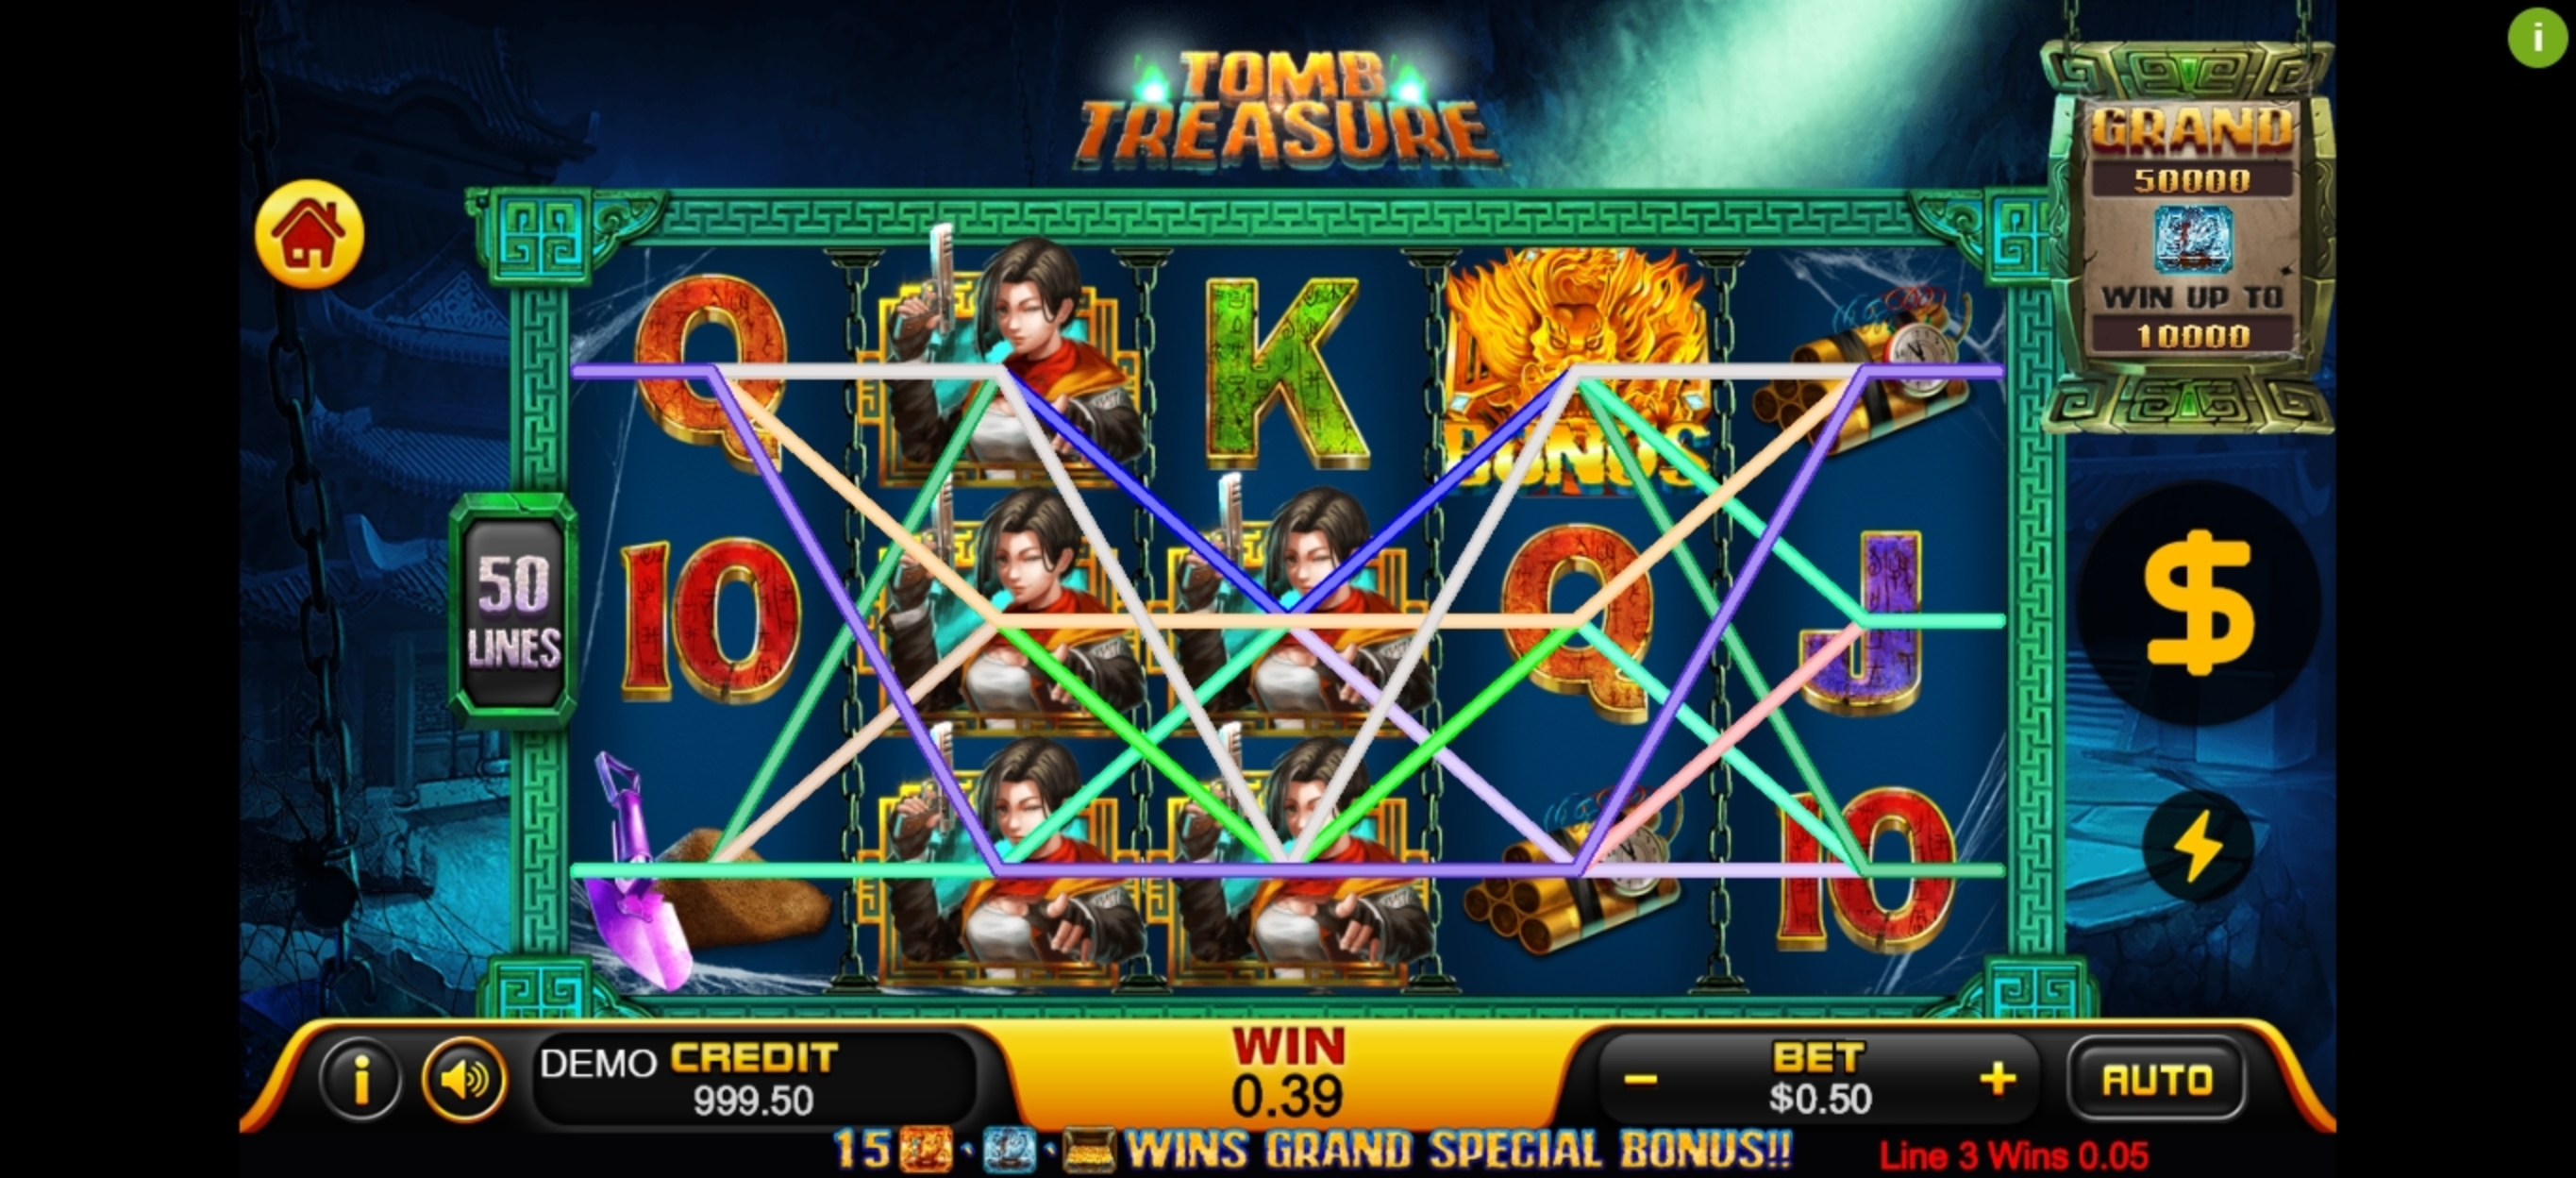 Win Money in Tomb Treasure Free Slot Game by PlayStar